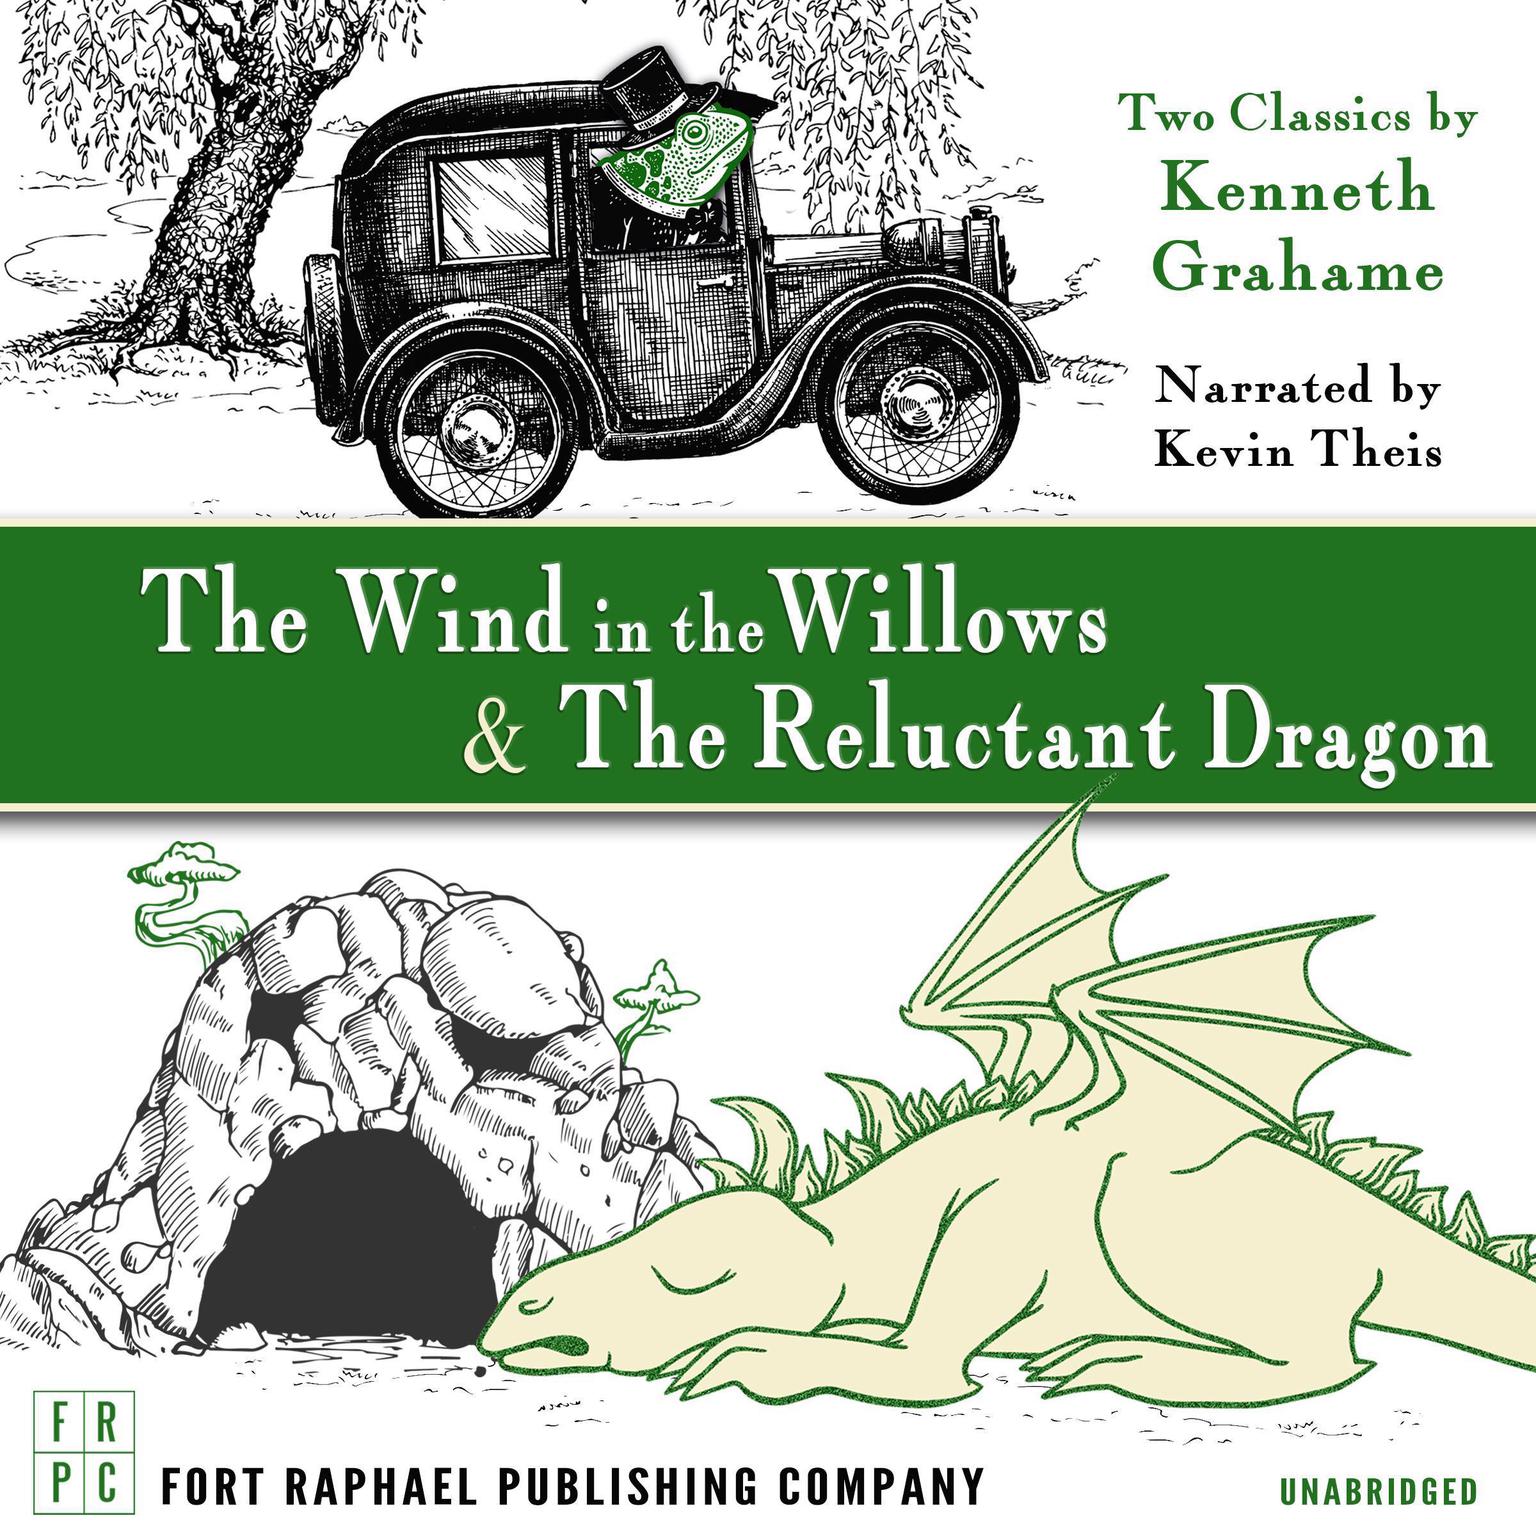 The Wind in the Willows AND The Reluctant Dragon - Unabridged: Two Classics by Kenneth Grahame! Audiobook, by Kenneth Grahame